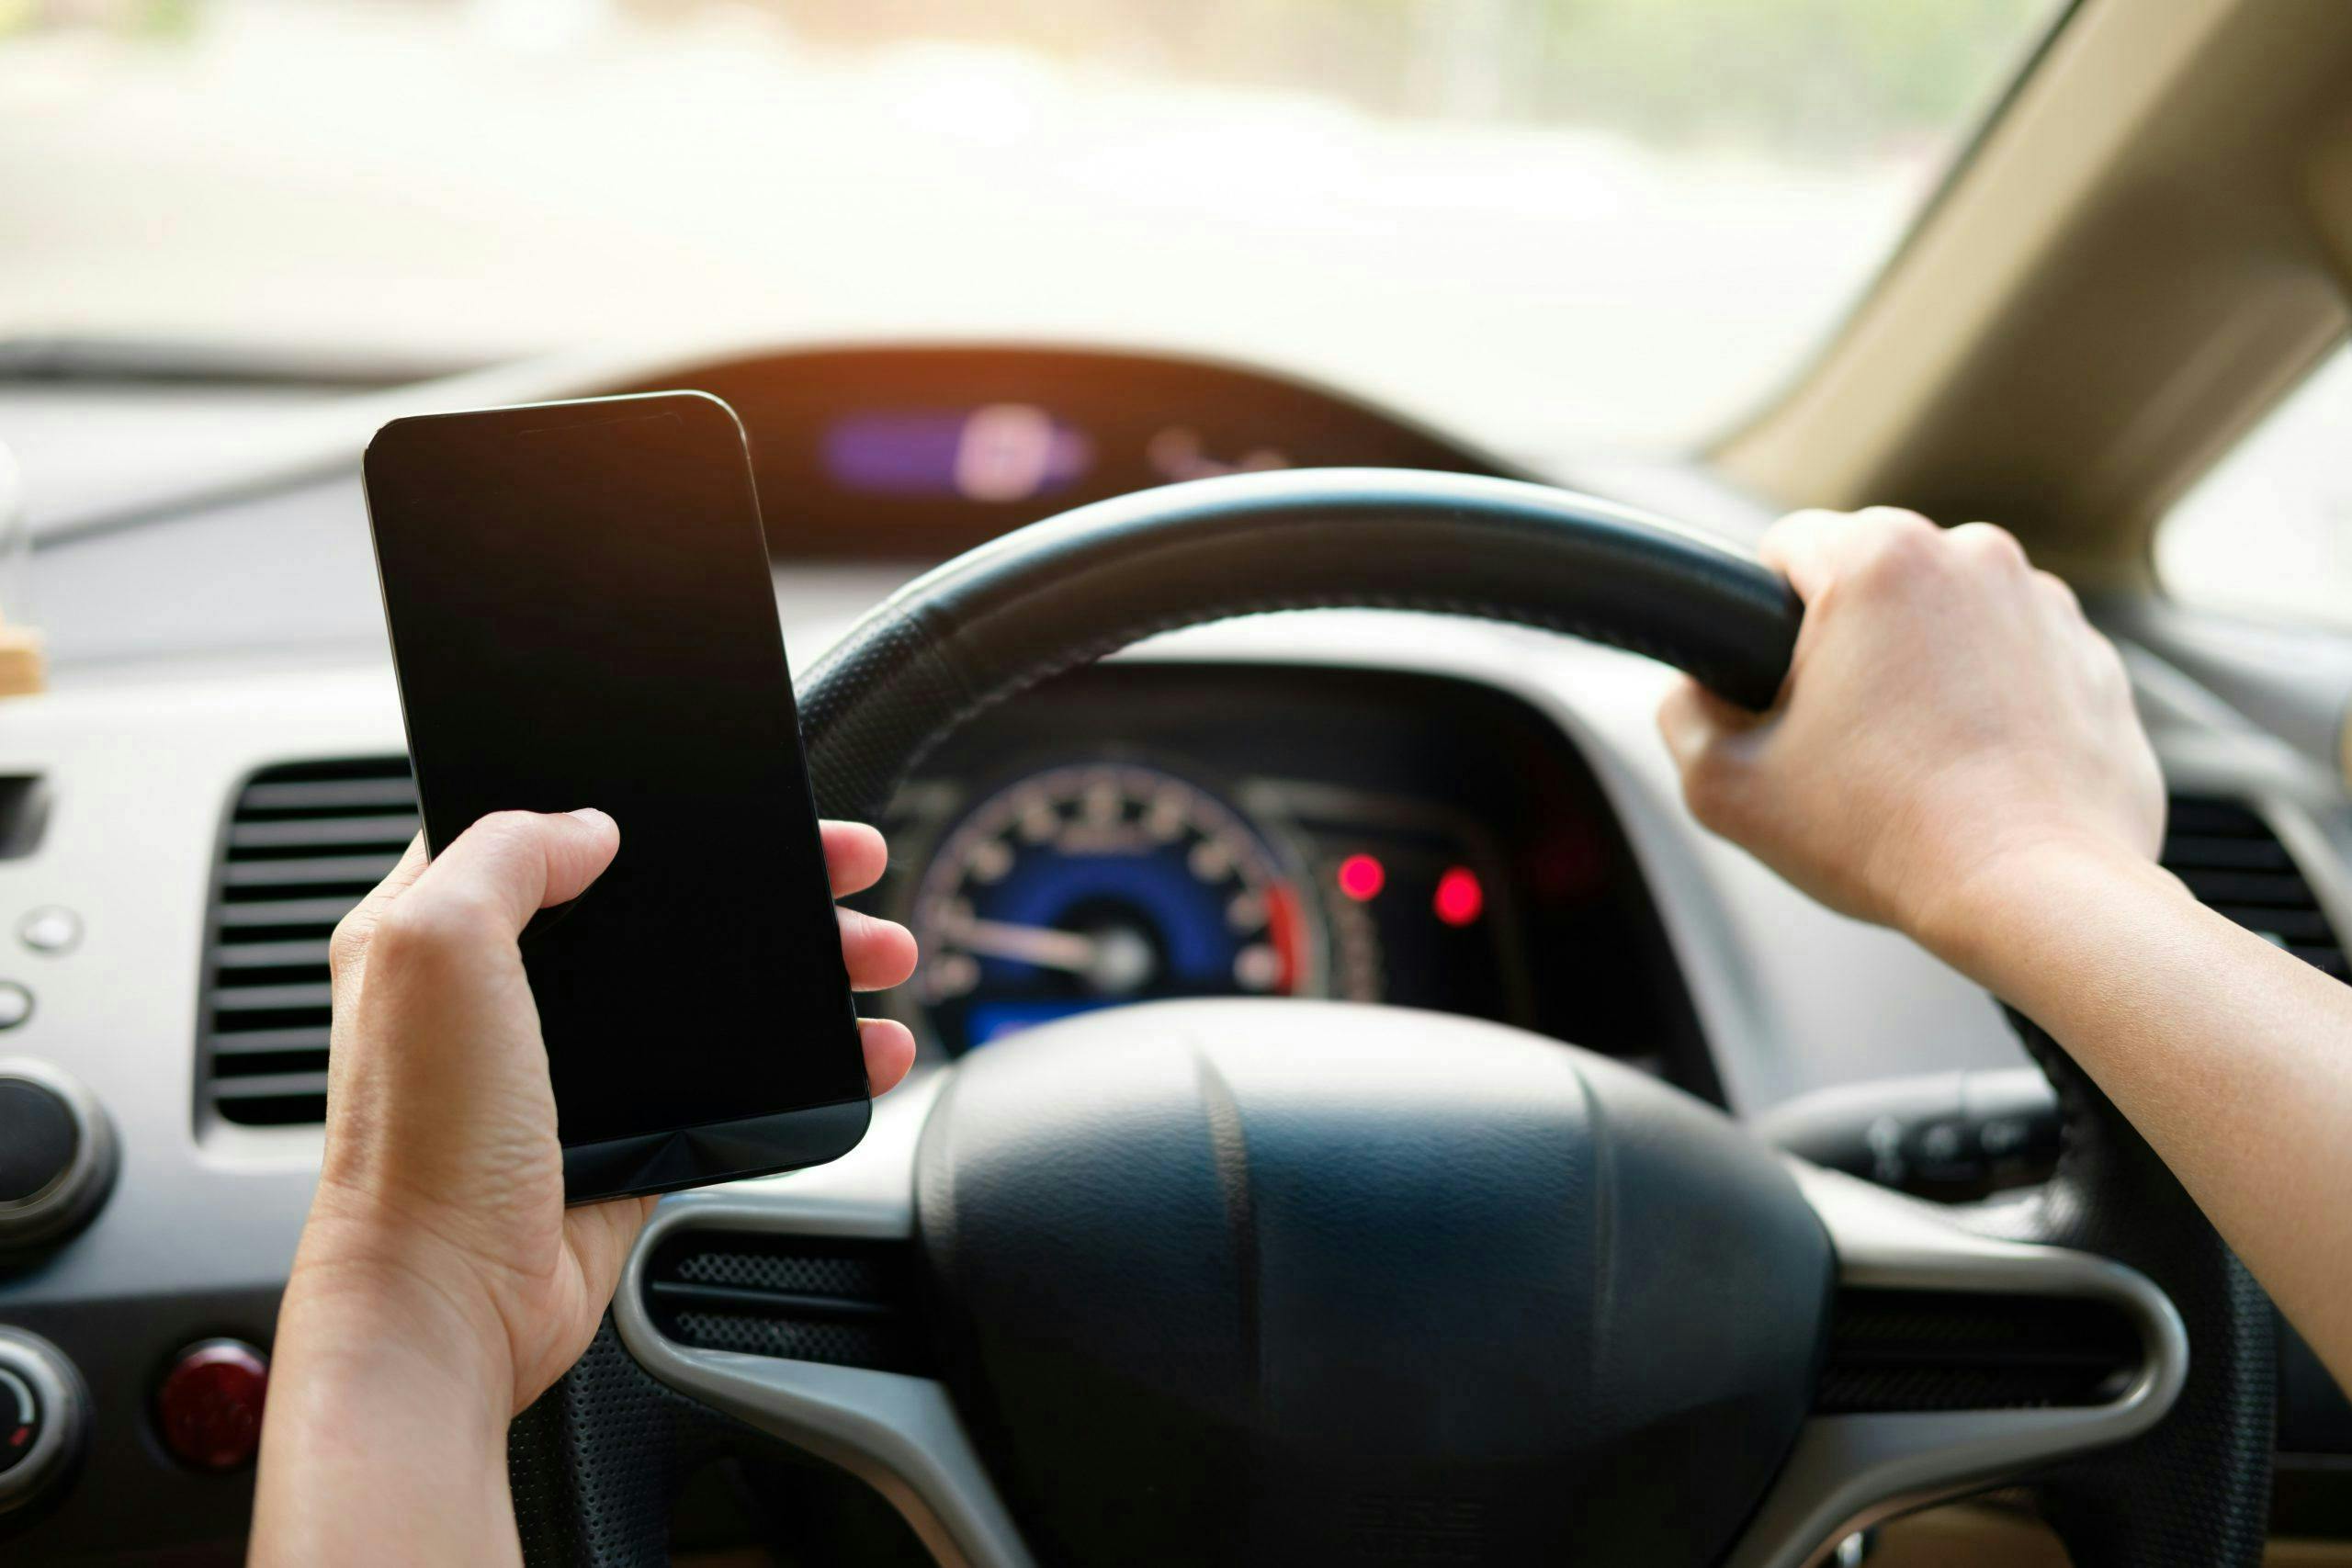 A person holds a smartphone in their left hand and grips a car steering wheel with their right hand, with a dashboard displaying speed and controls in the background.